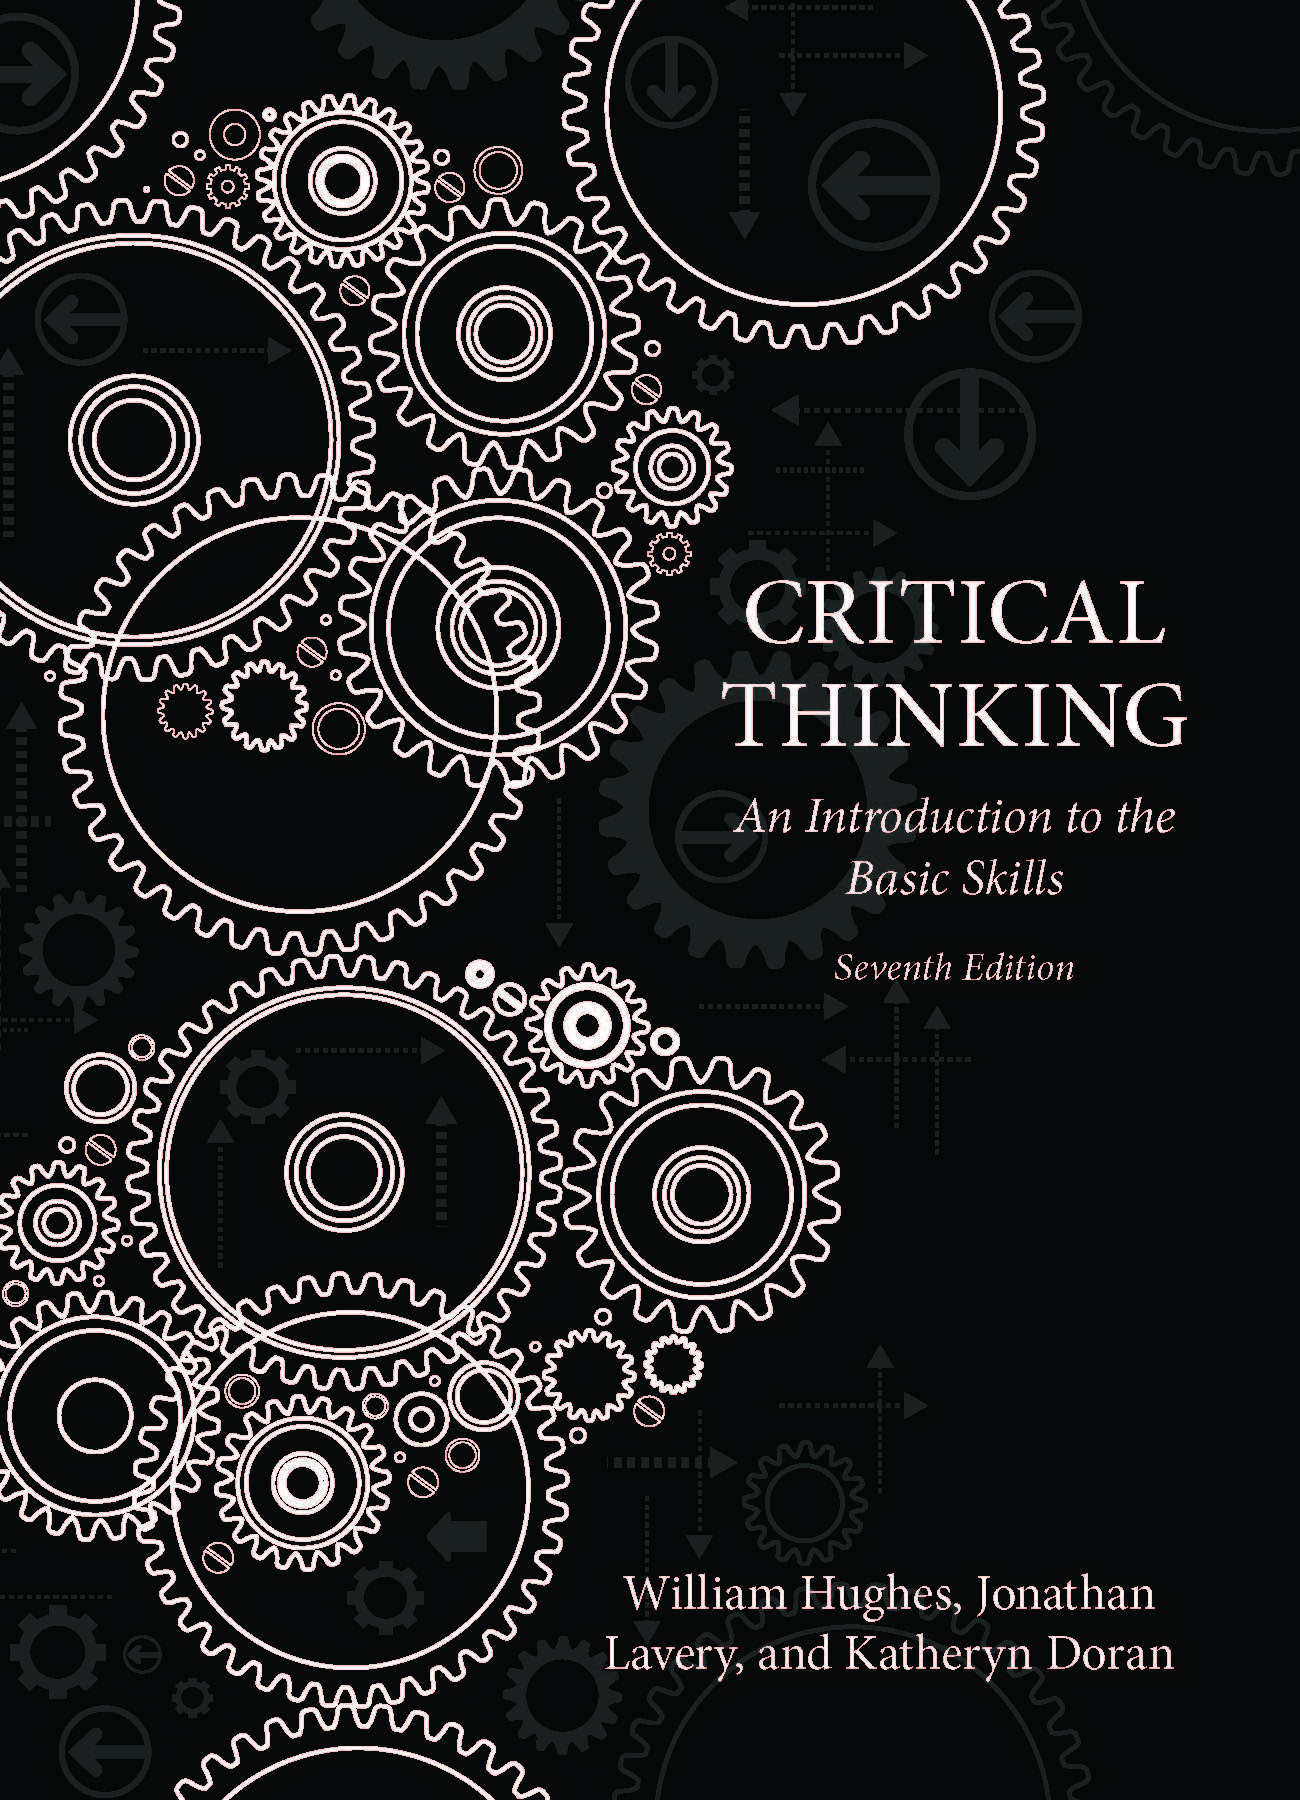 students guide to critical thinking pdf